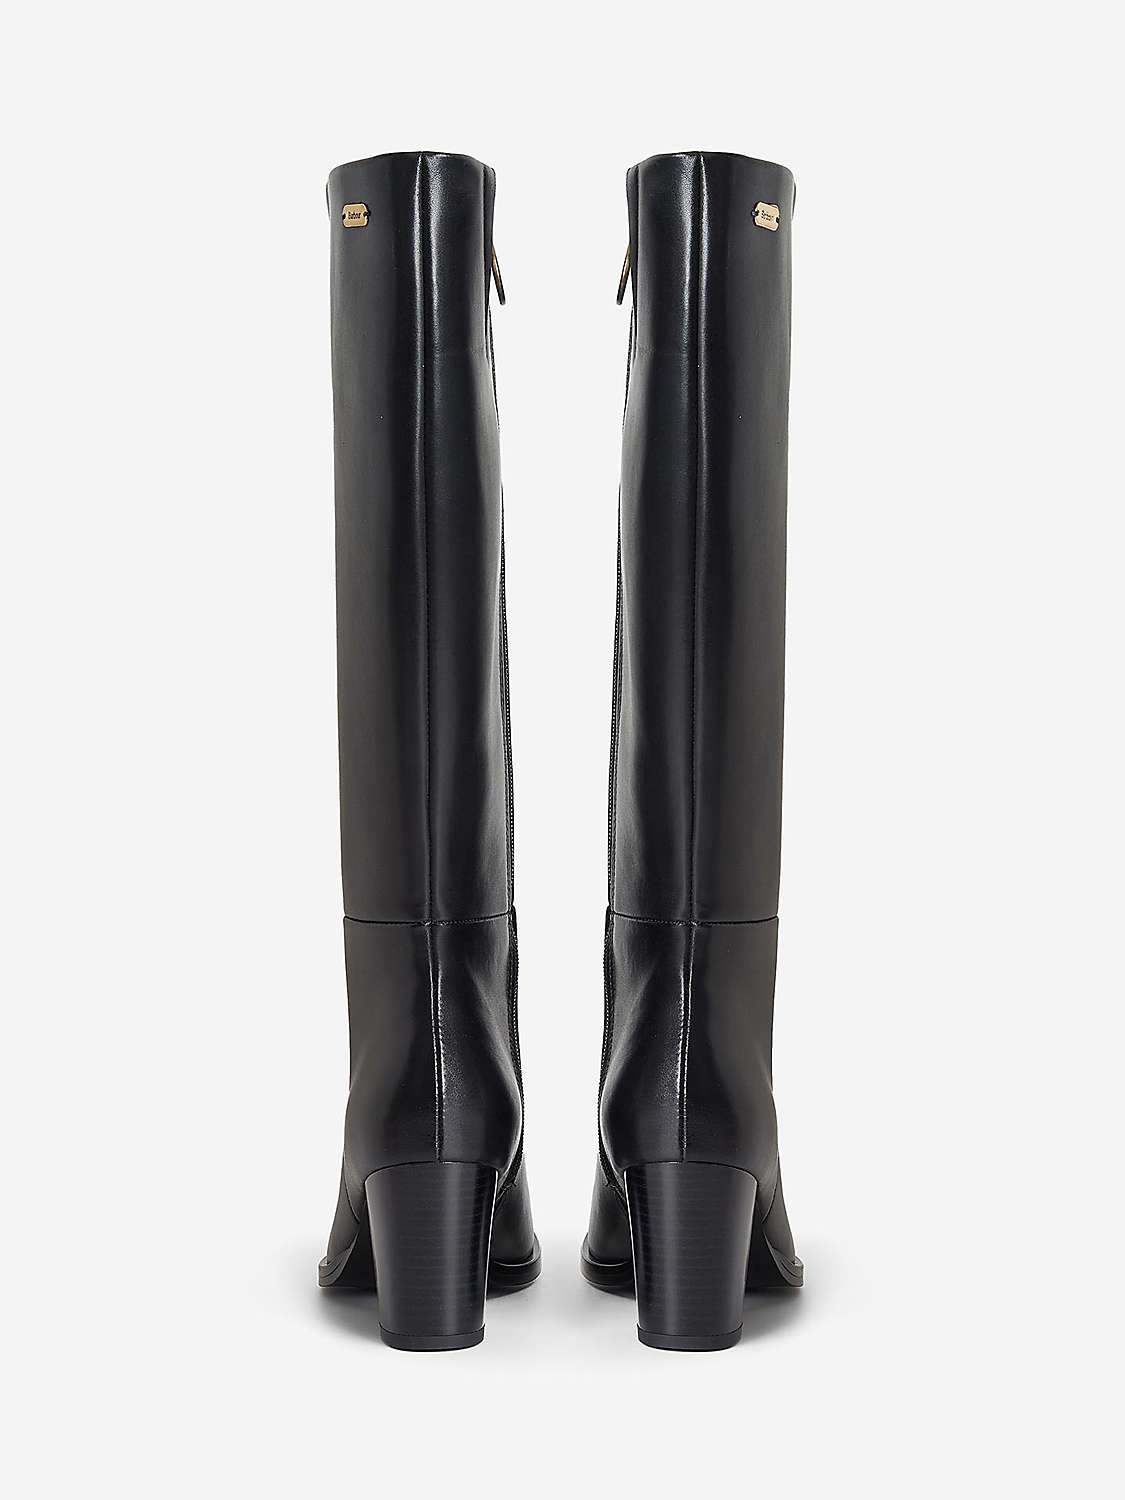 Barbour Gloria Leather Knee High Boots, Black at John Lewis & Partners